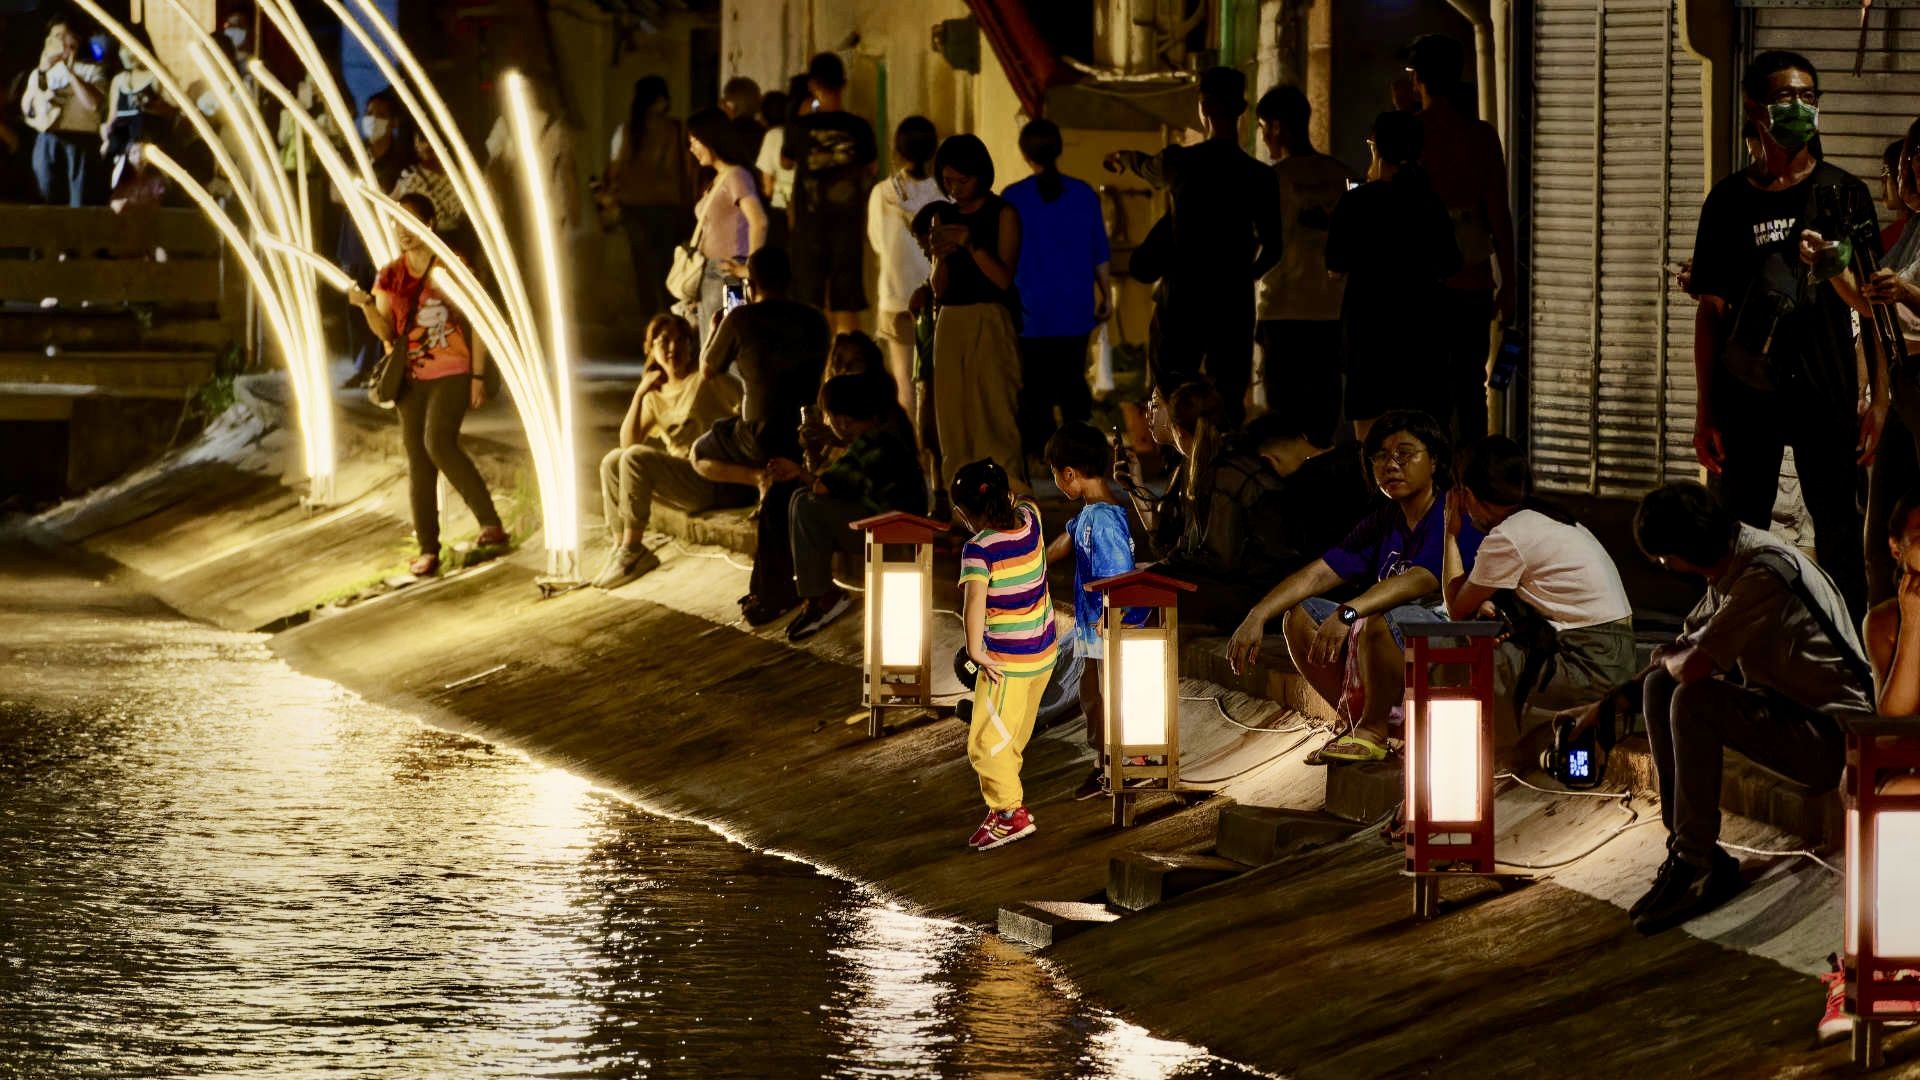 A crowd of people sitting and playing amongst lanterns at night, next to a small urban canal.